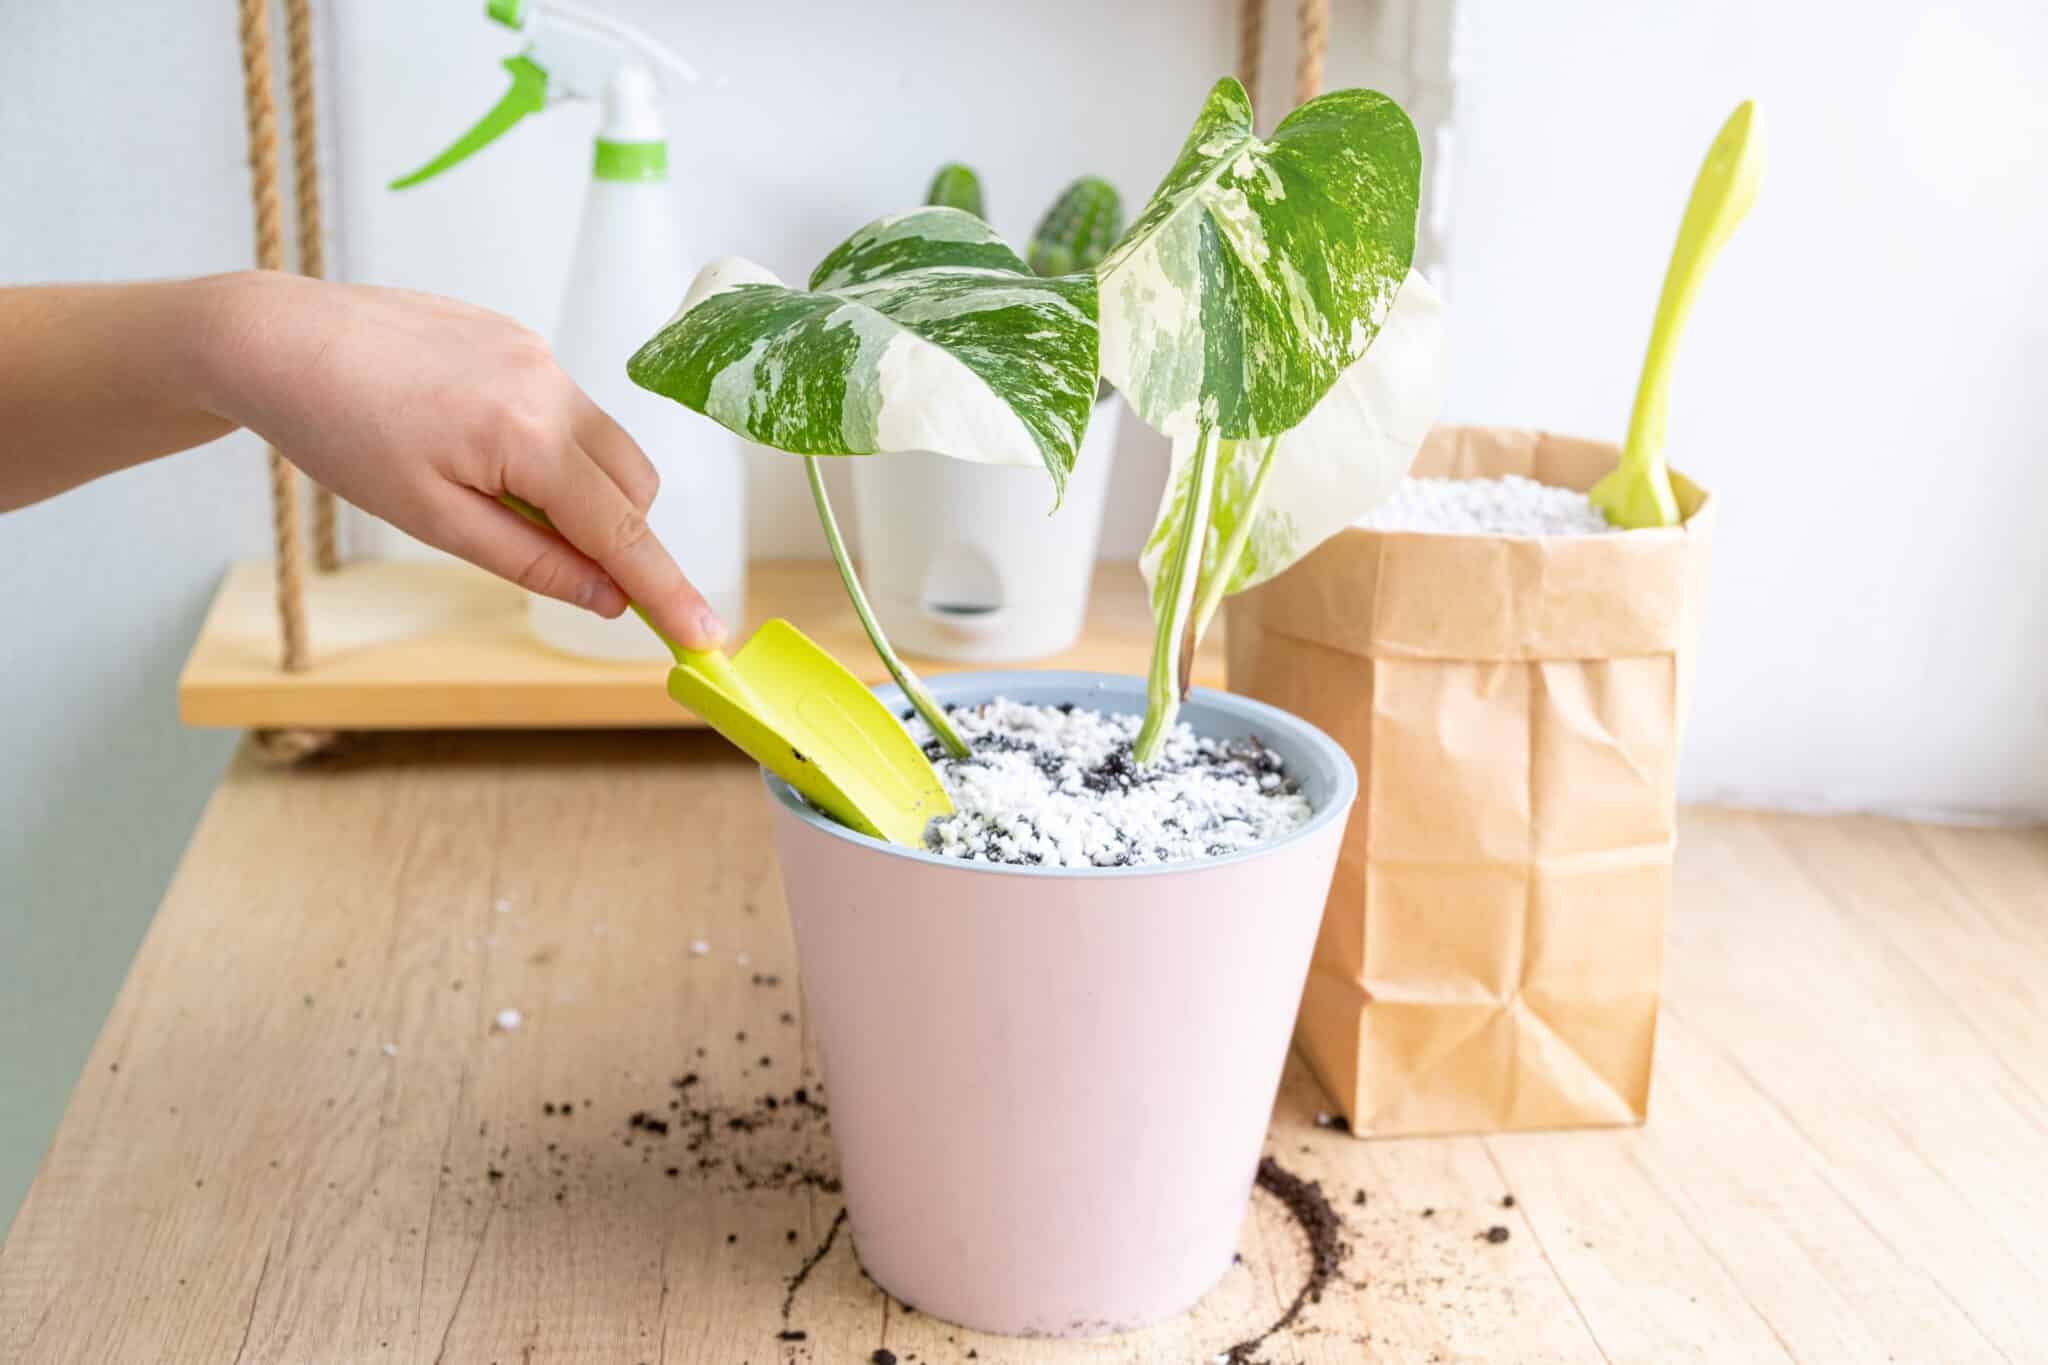 a hand using a shovel to put a plant in a pot.